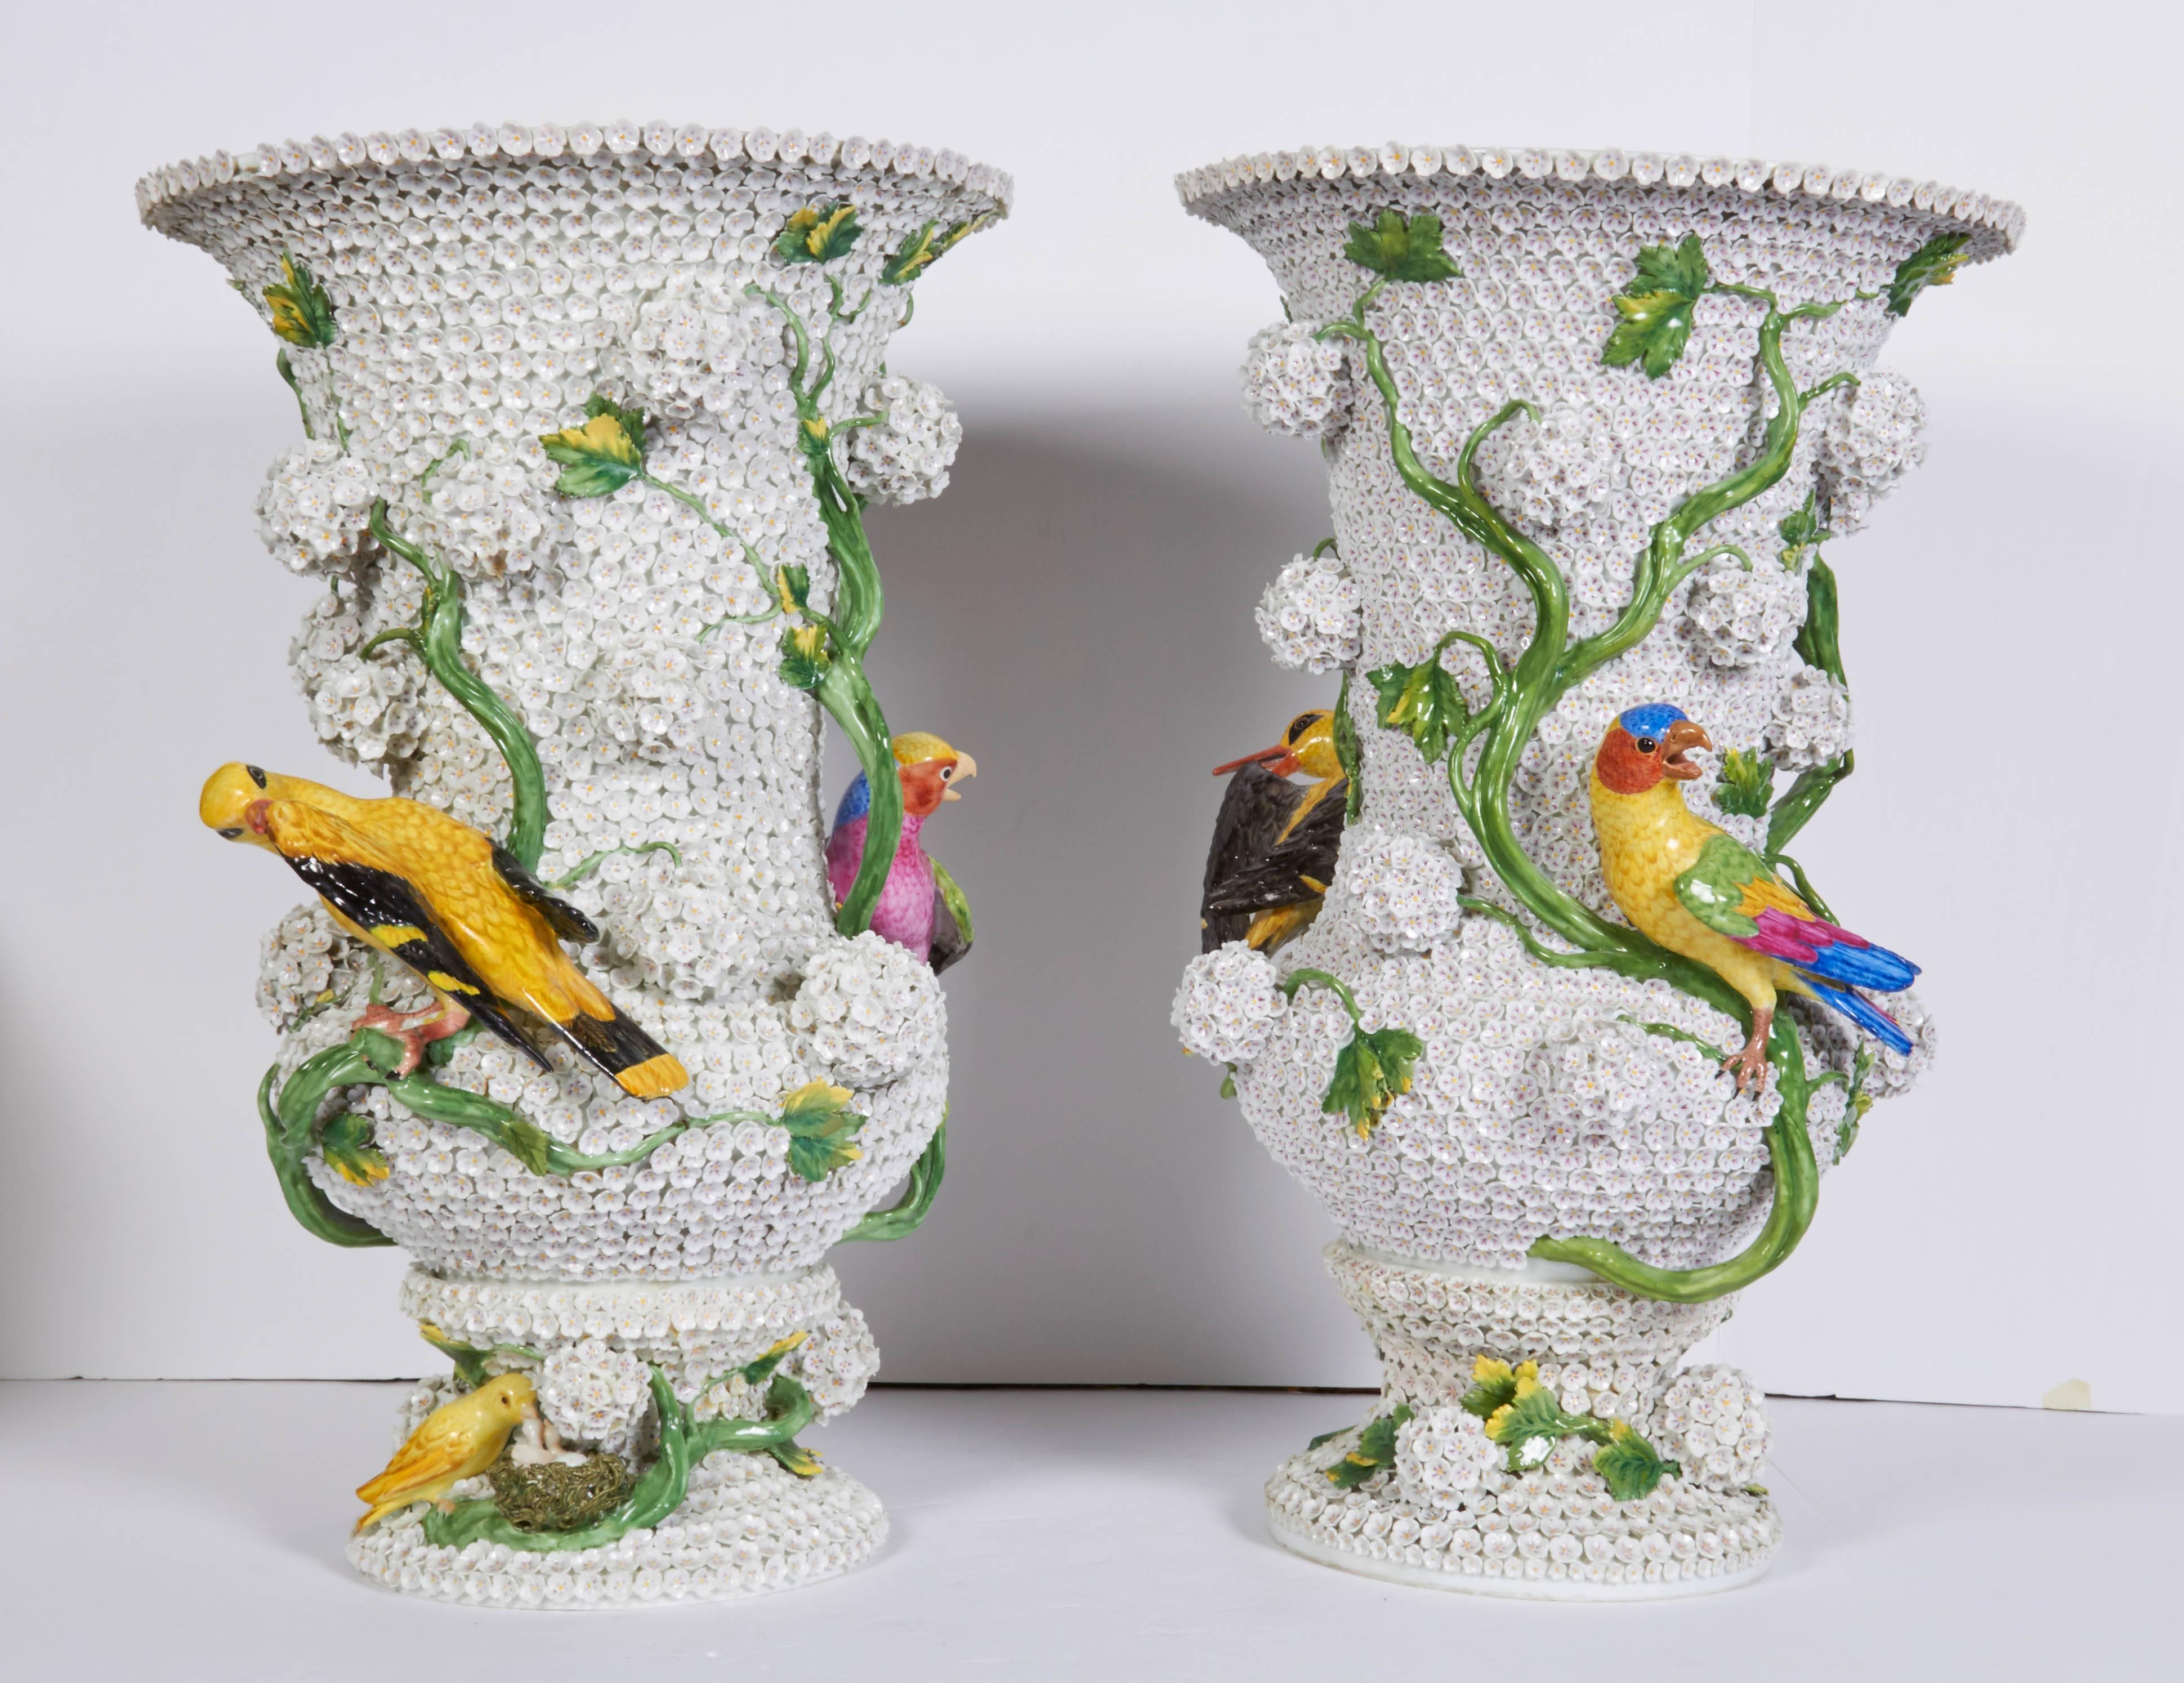 This rare and monumental antique pair of Meissen Porcelain 22 inch vases is crafted in the illustrious Schneeballen, or Snowball, pattern. First modeled by the famed Johann Joachim KÃ¦ndler in 1741, these magnificent vases are covered with hundreds